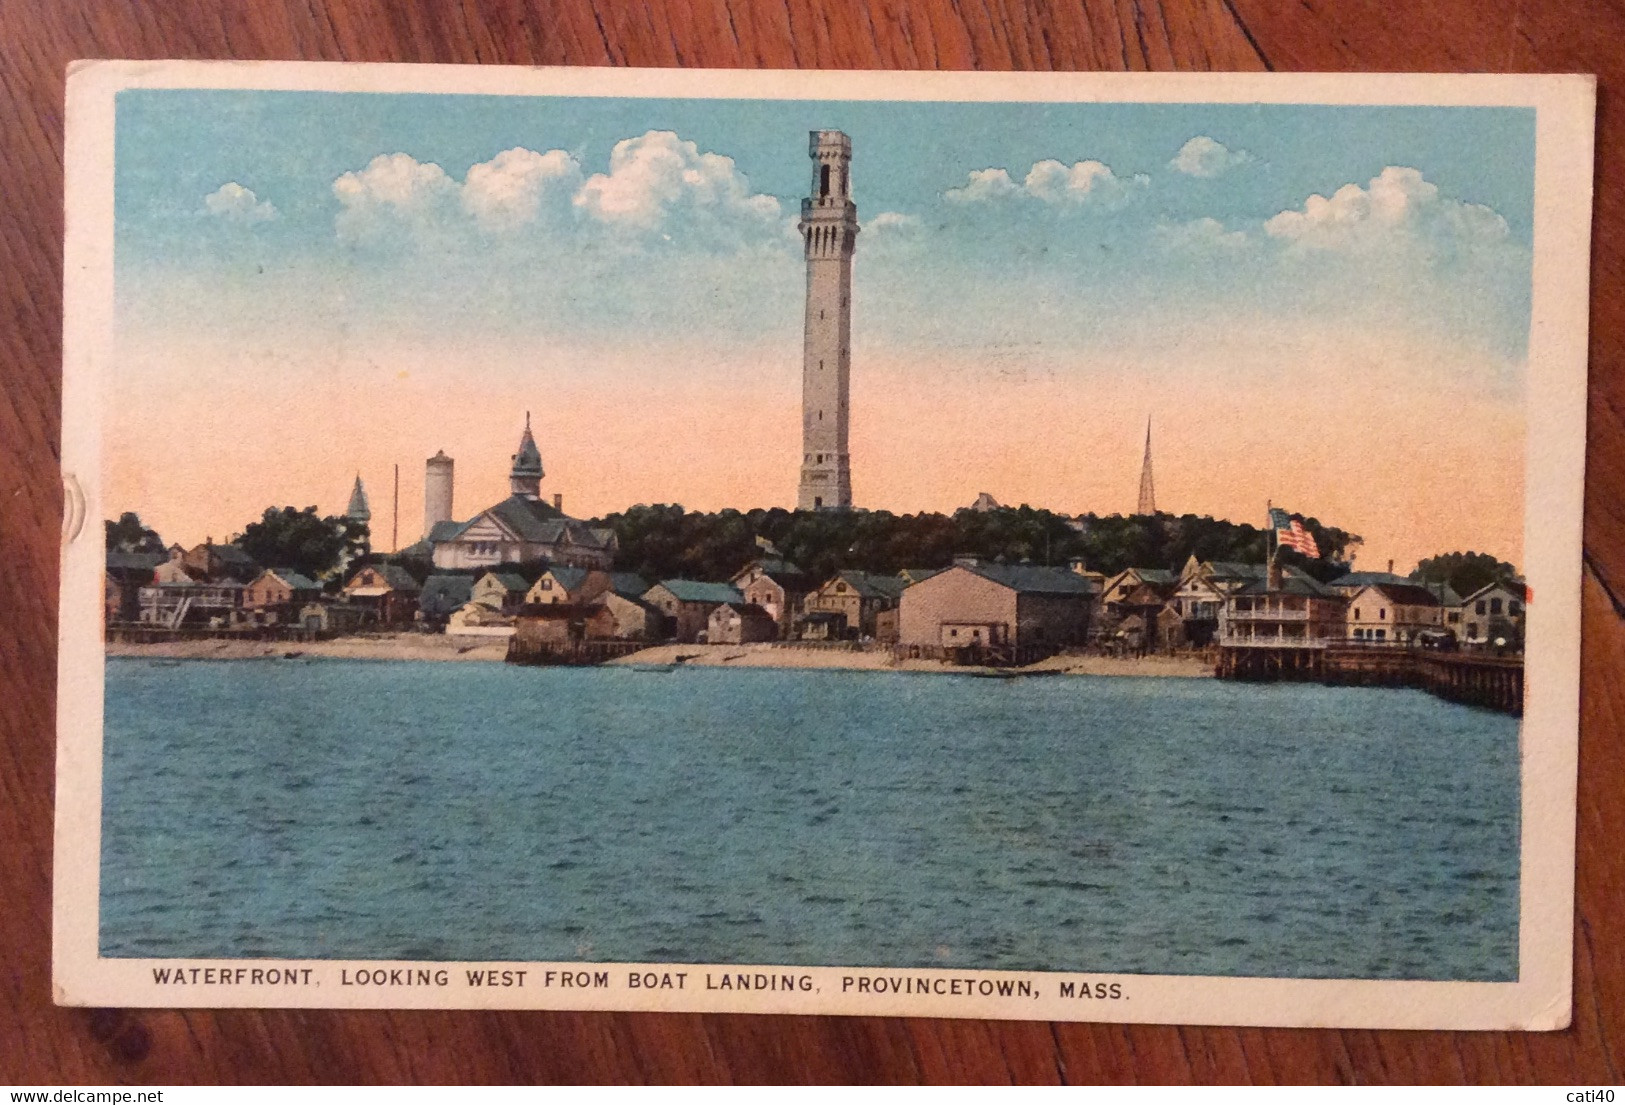 USA - PROVINCETOWN - WATERFRONT  LOOKING WEST FROM BOAT LANDING    - VINTAGE POST CARD   1918 - Fall River